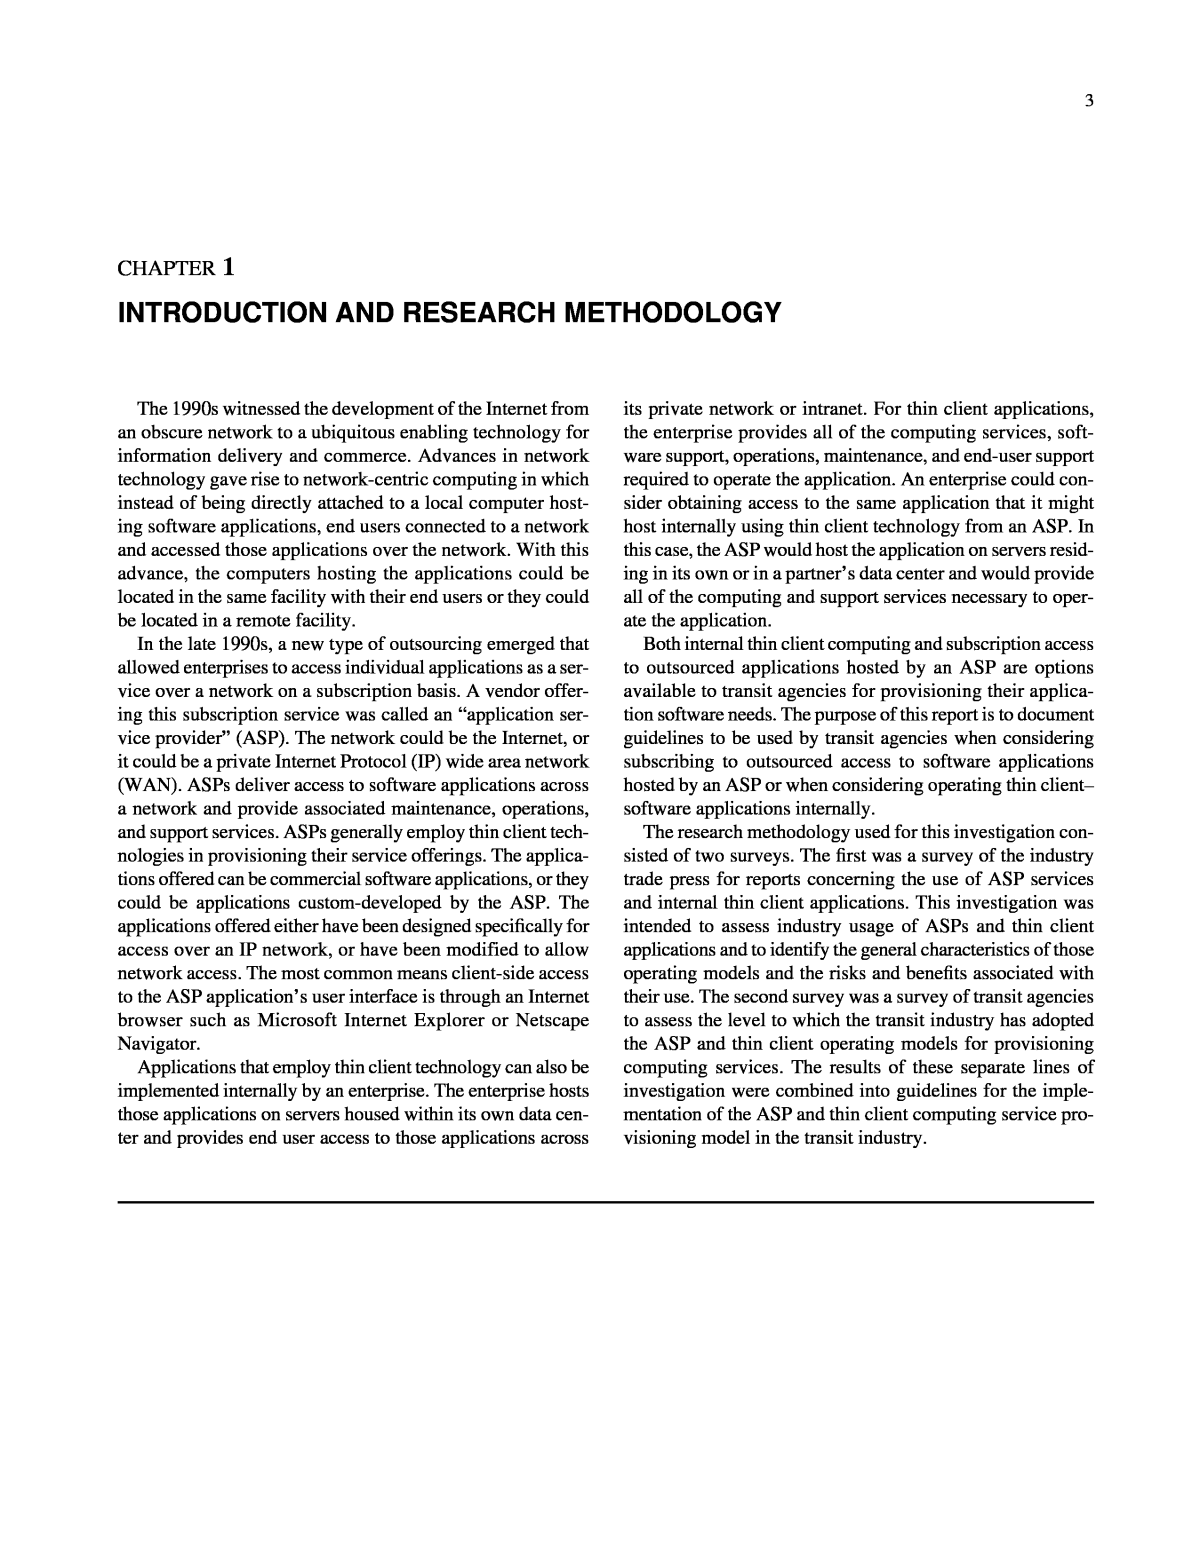 chapter 1 of research methodology